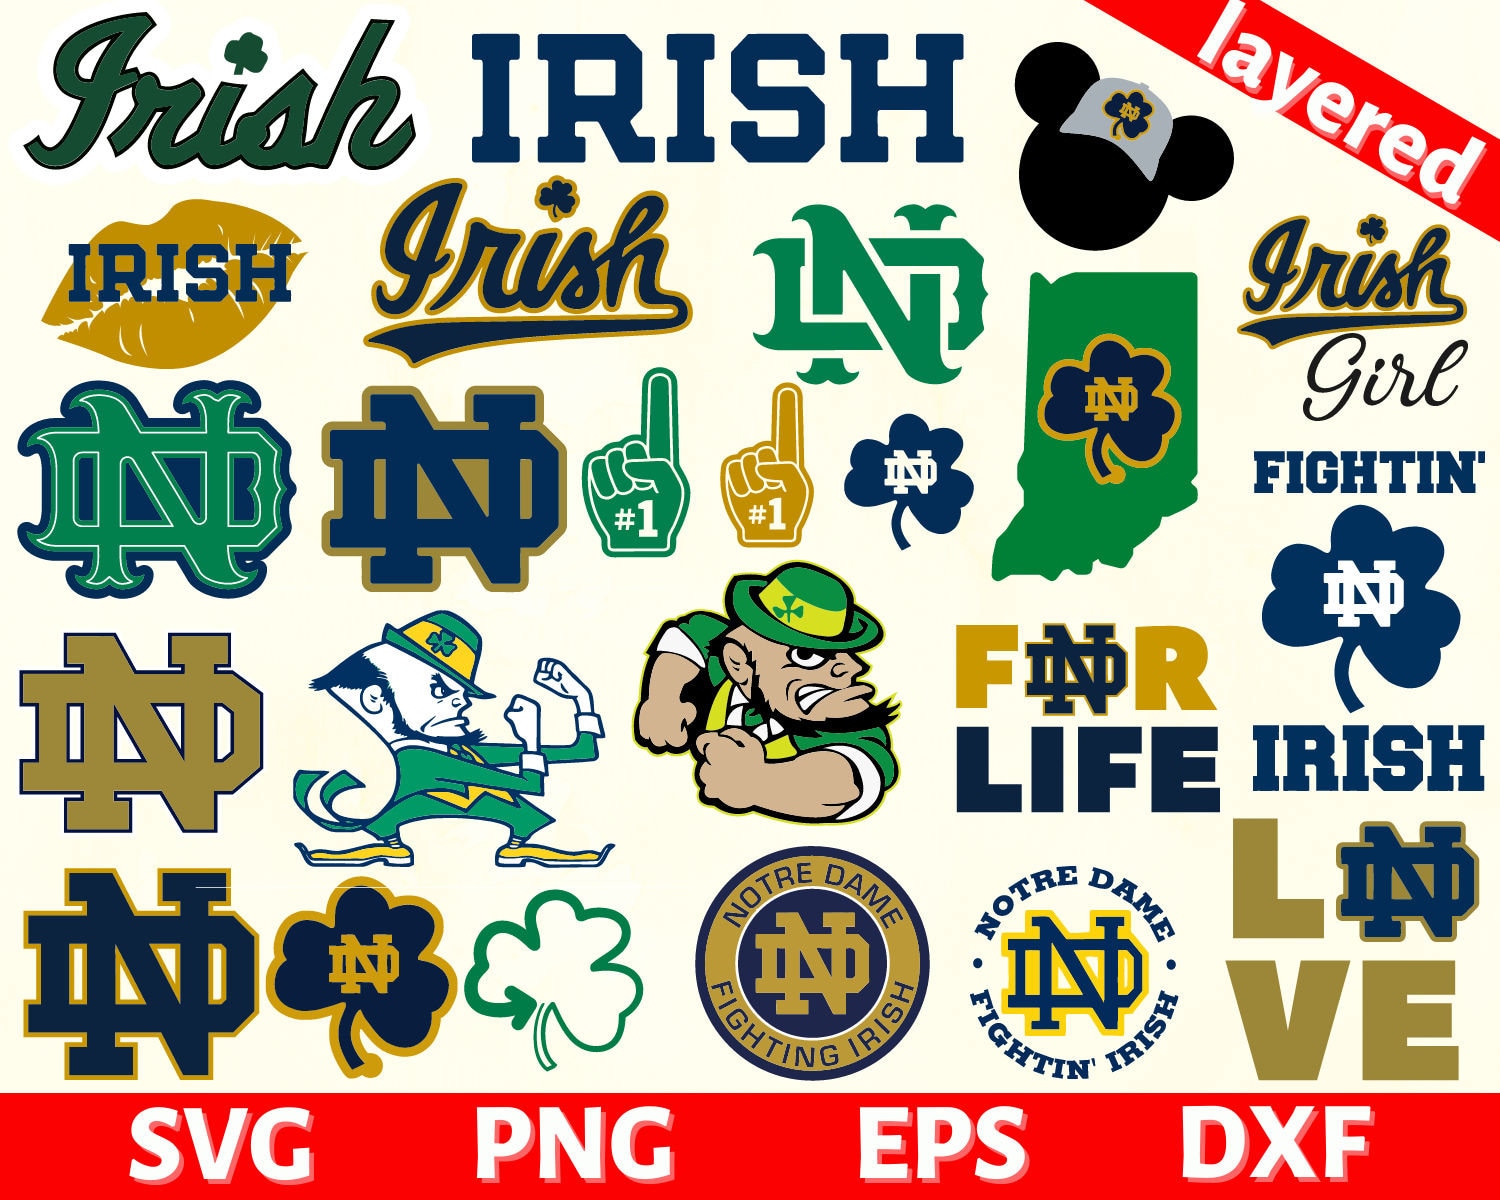  (2 Pack) Notre Dame 4w x 3h Premium Die-Cut Vinyl Decal for  Auto Decal, Laptops, Yeti, Gear, Best value with Quality : Handmade Products